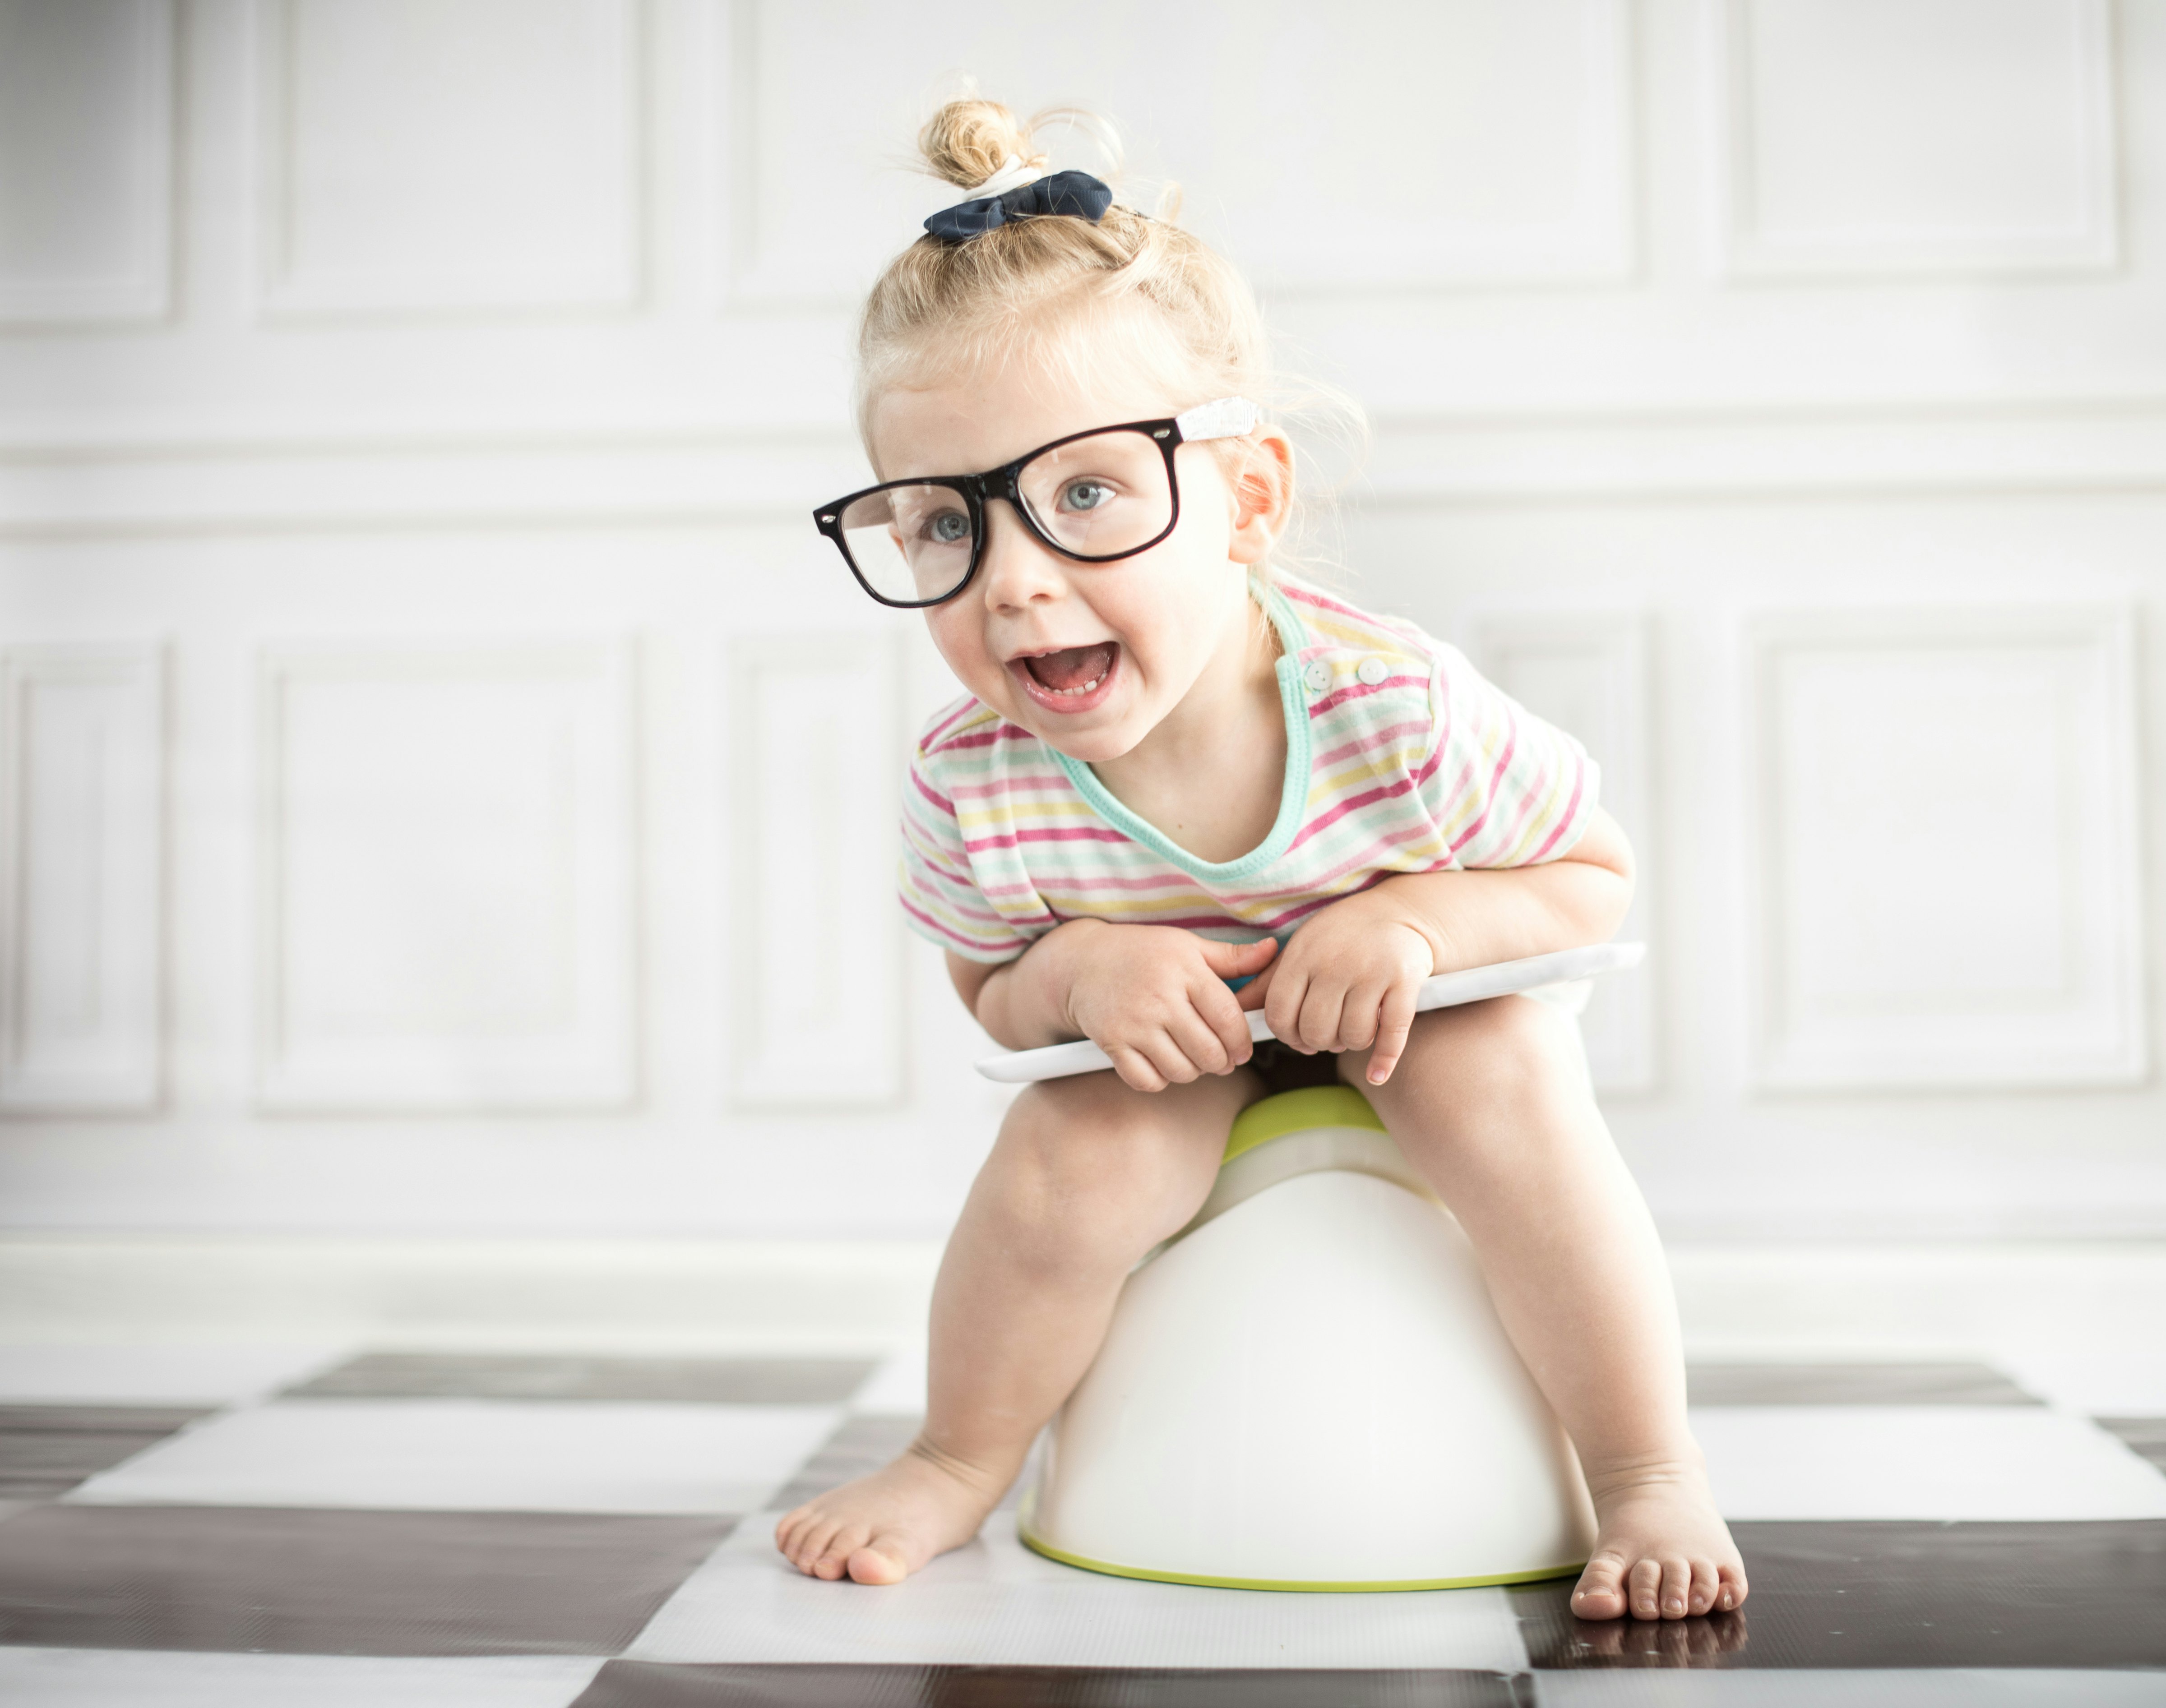 How to Deal With Potty Training Regressions